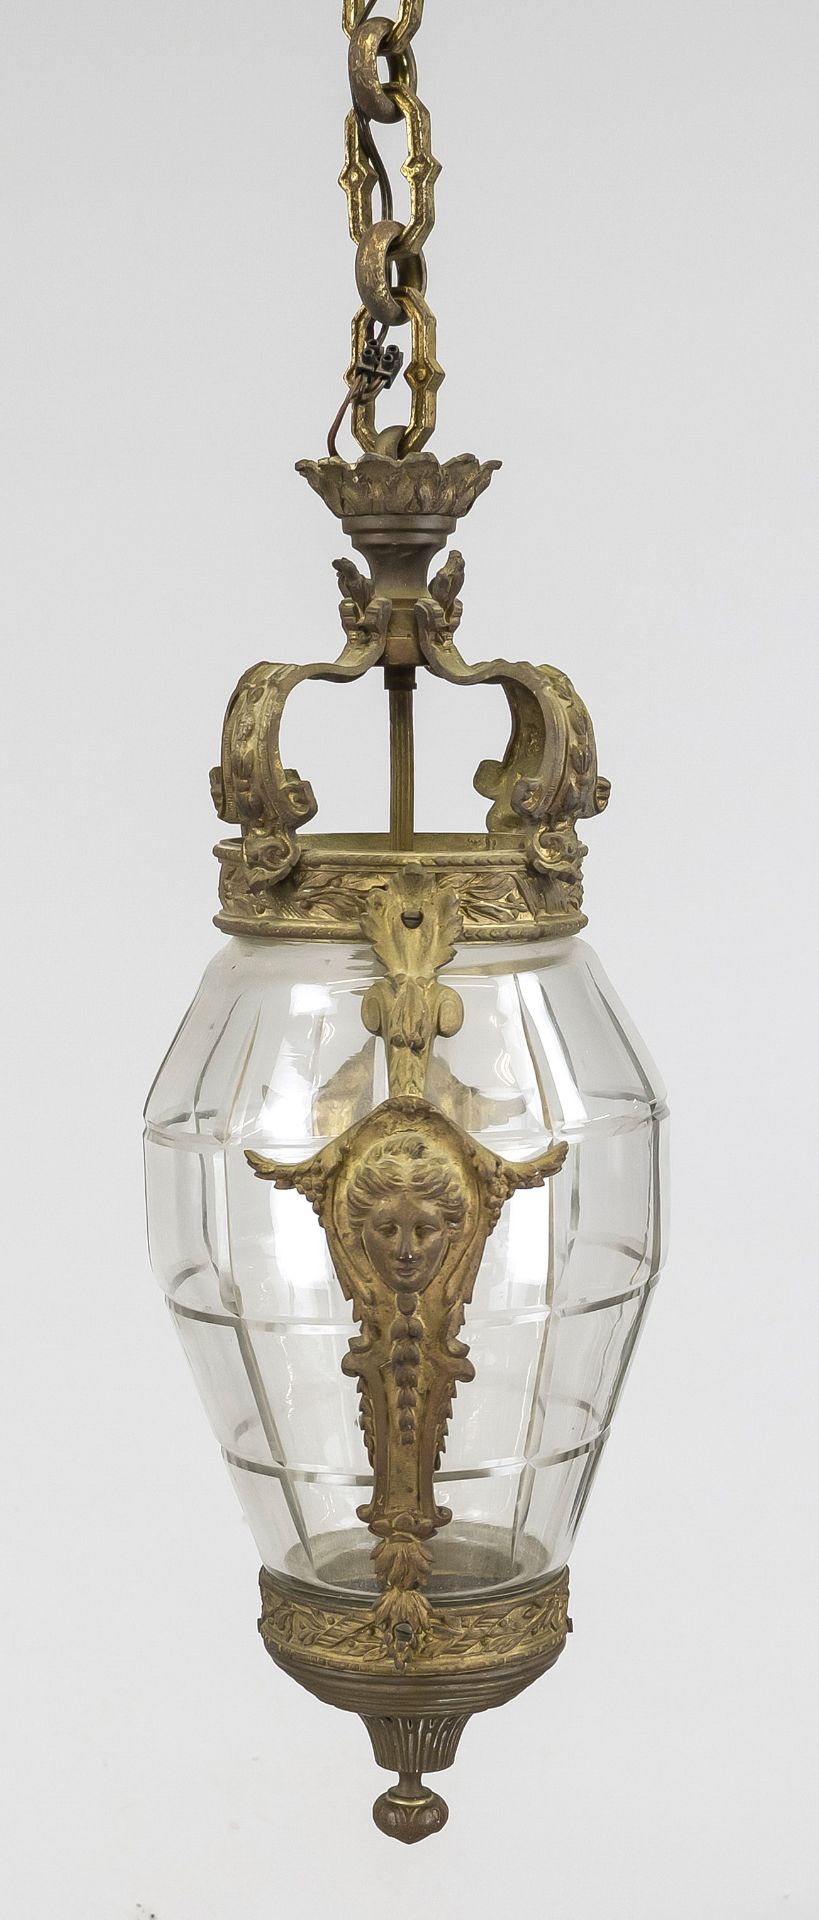 Ceiling lantern, late 19th century, faceted glass body in ornamented frame with mascarons and crown.